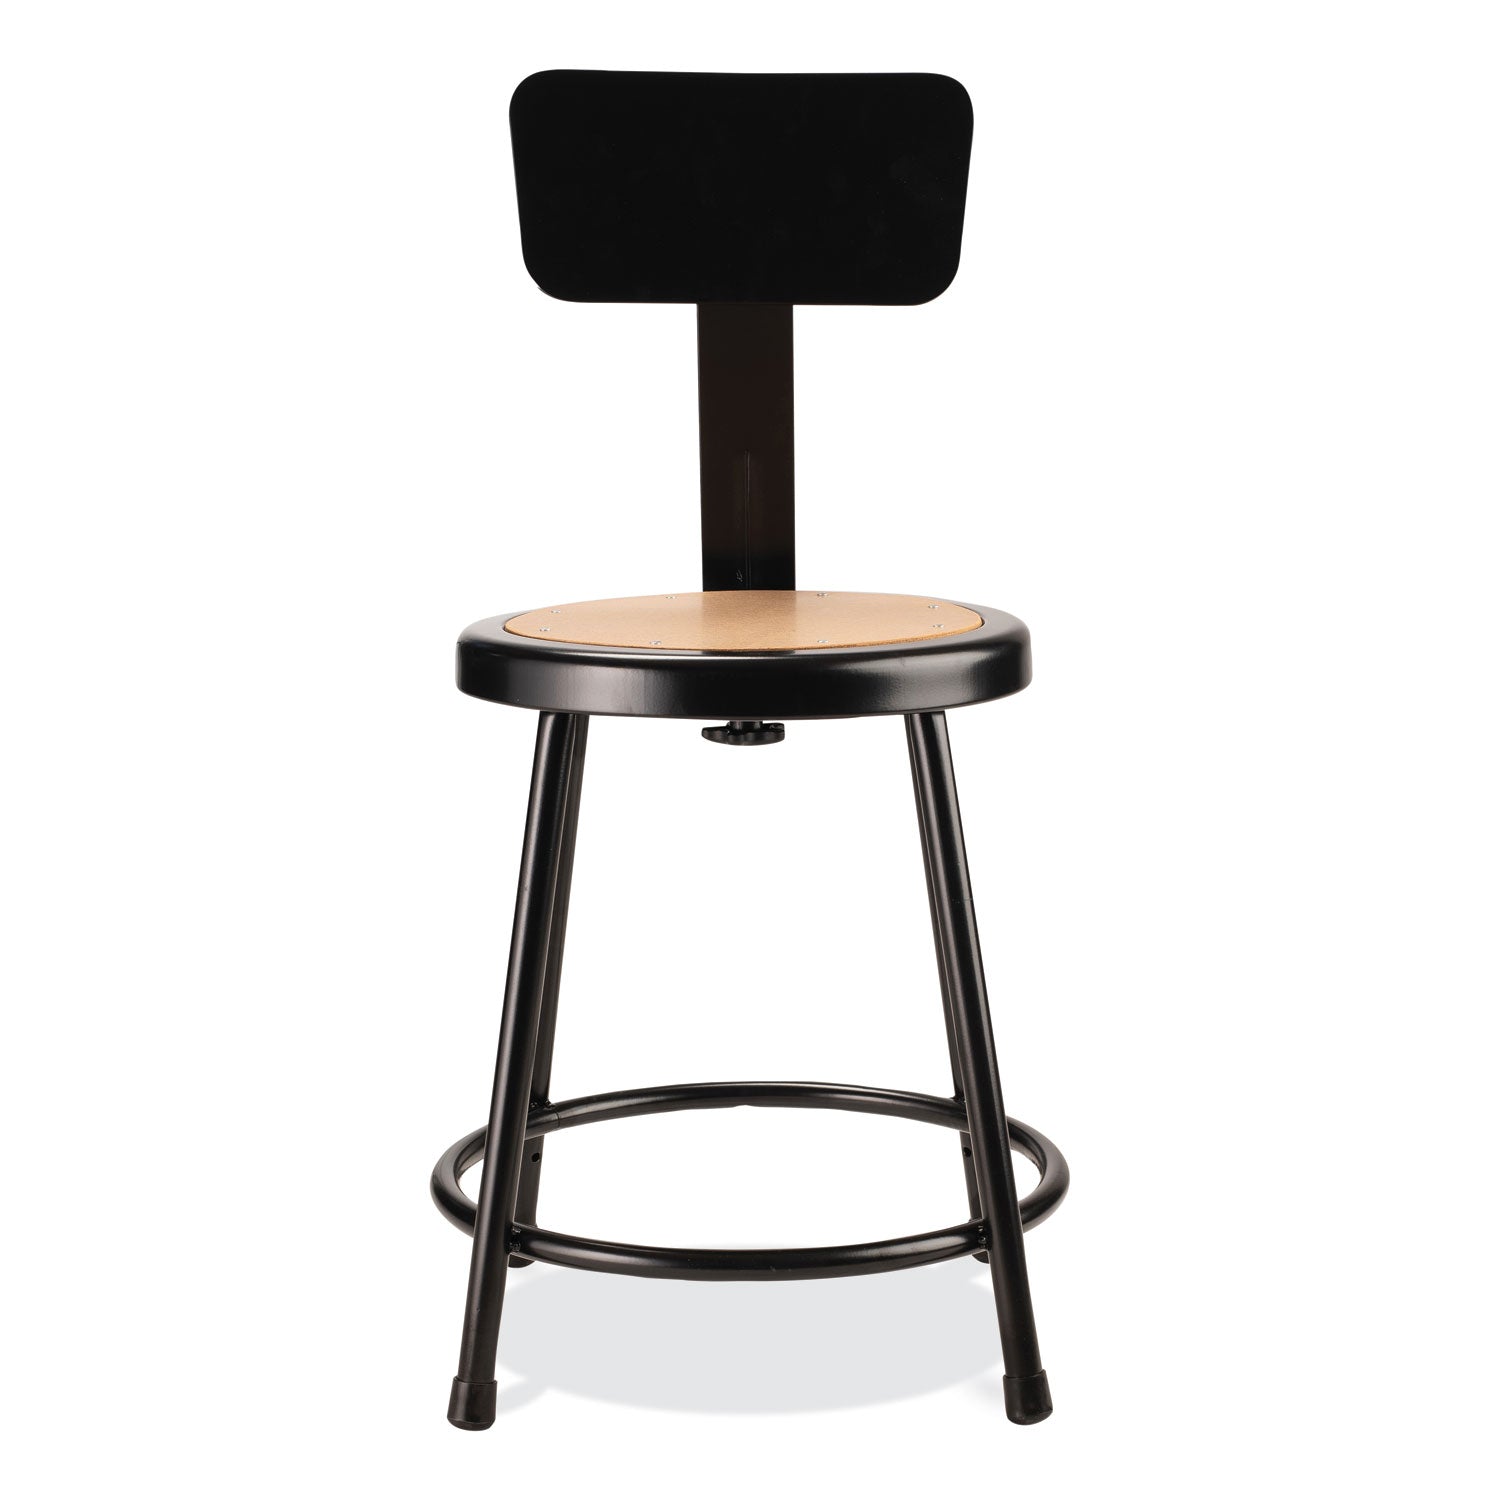 6200-series-18-heavy-duty-stool-w-backrest-supports-500-lb-33-seat-ht-brown-seat-black-back-base-ships-in-1-3-bus-days_nps6218b10 - 2